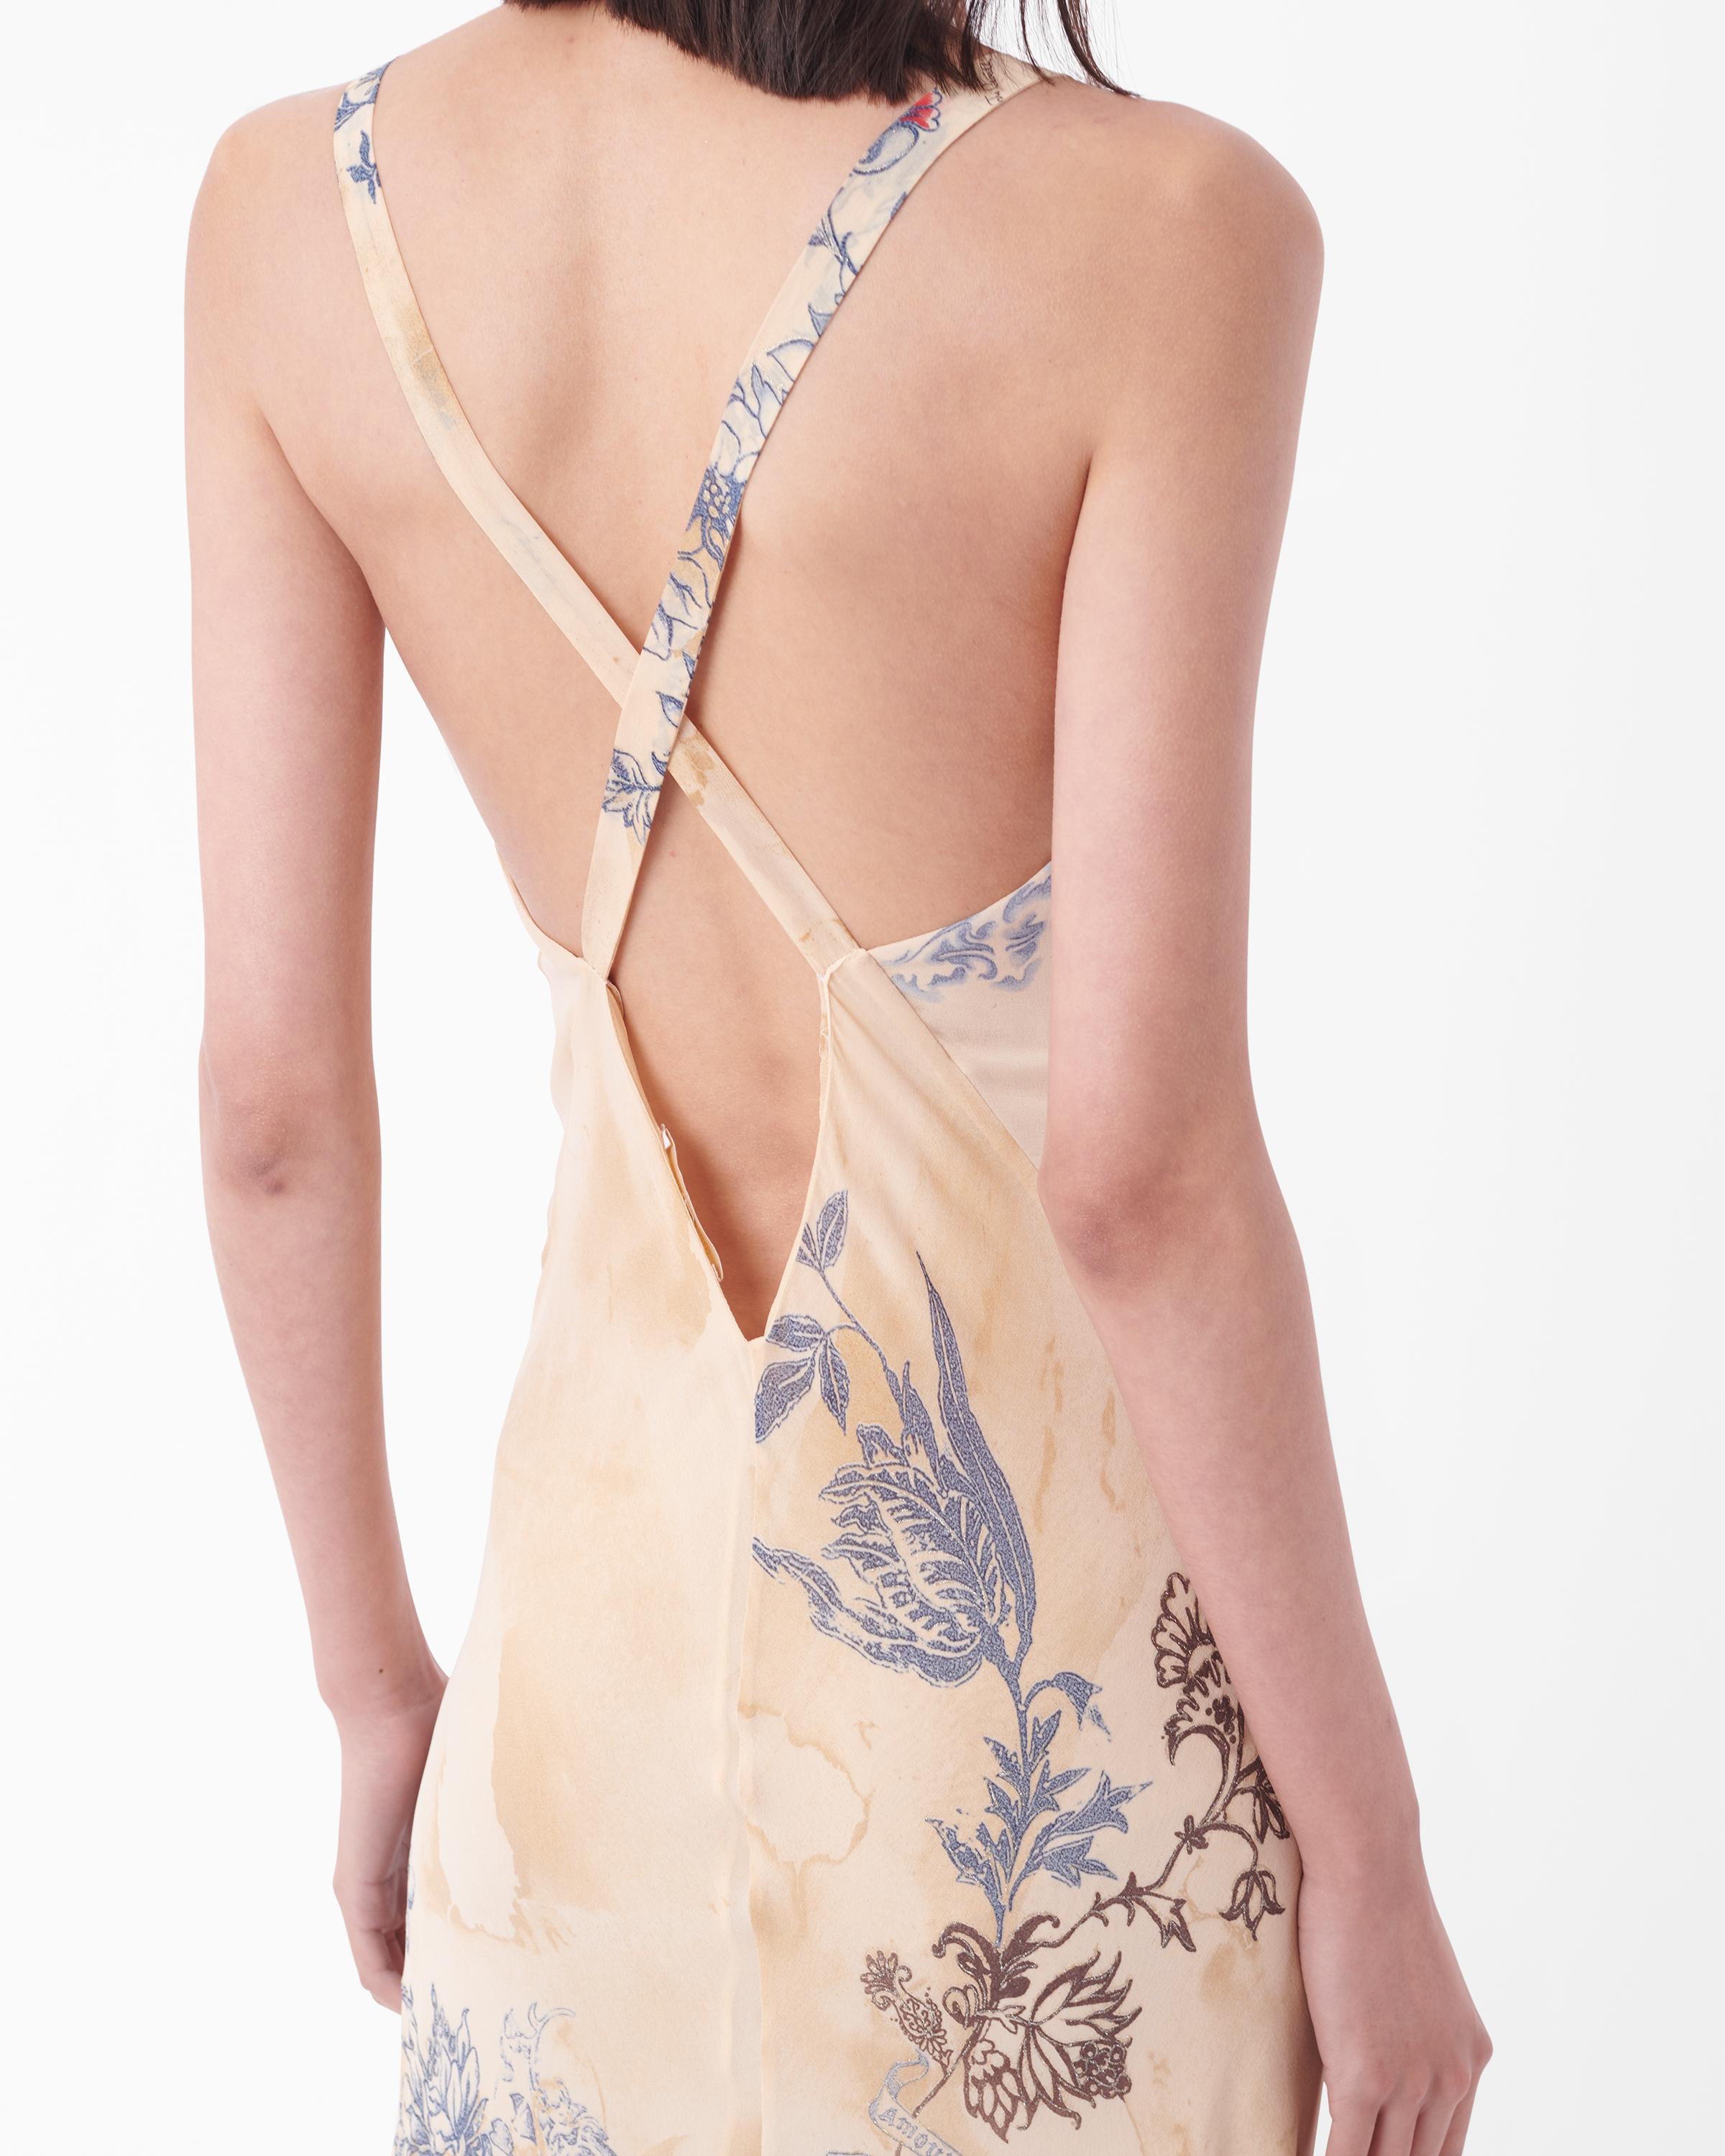 Vintage S/S 2003 Runway Tattoo Backless Silk Gown For Sale 2